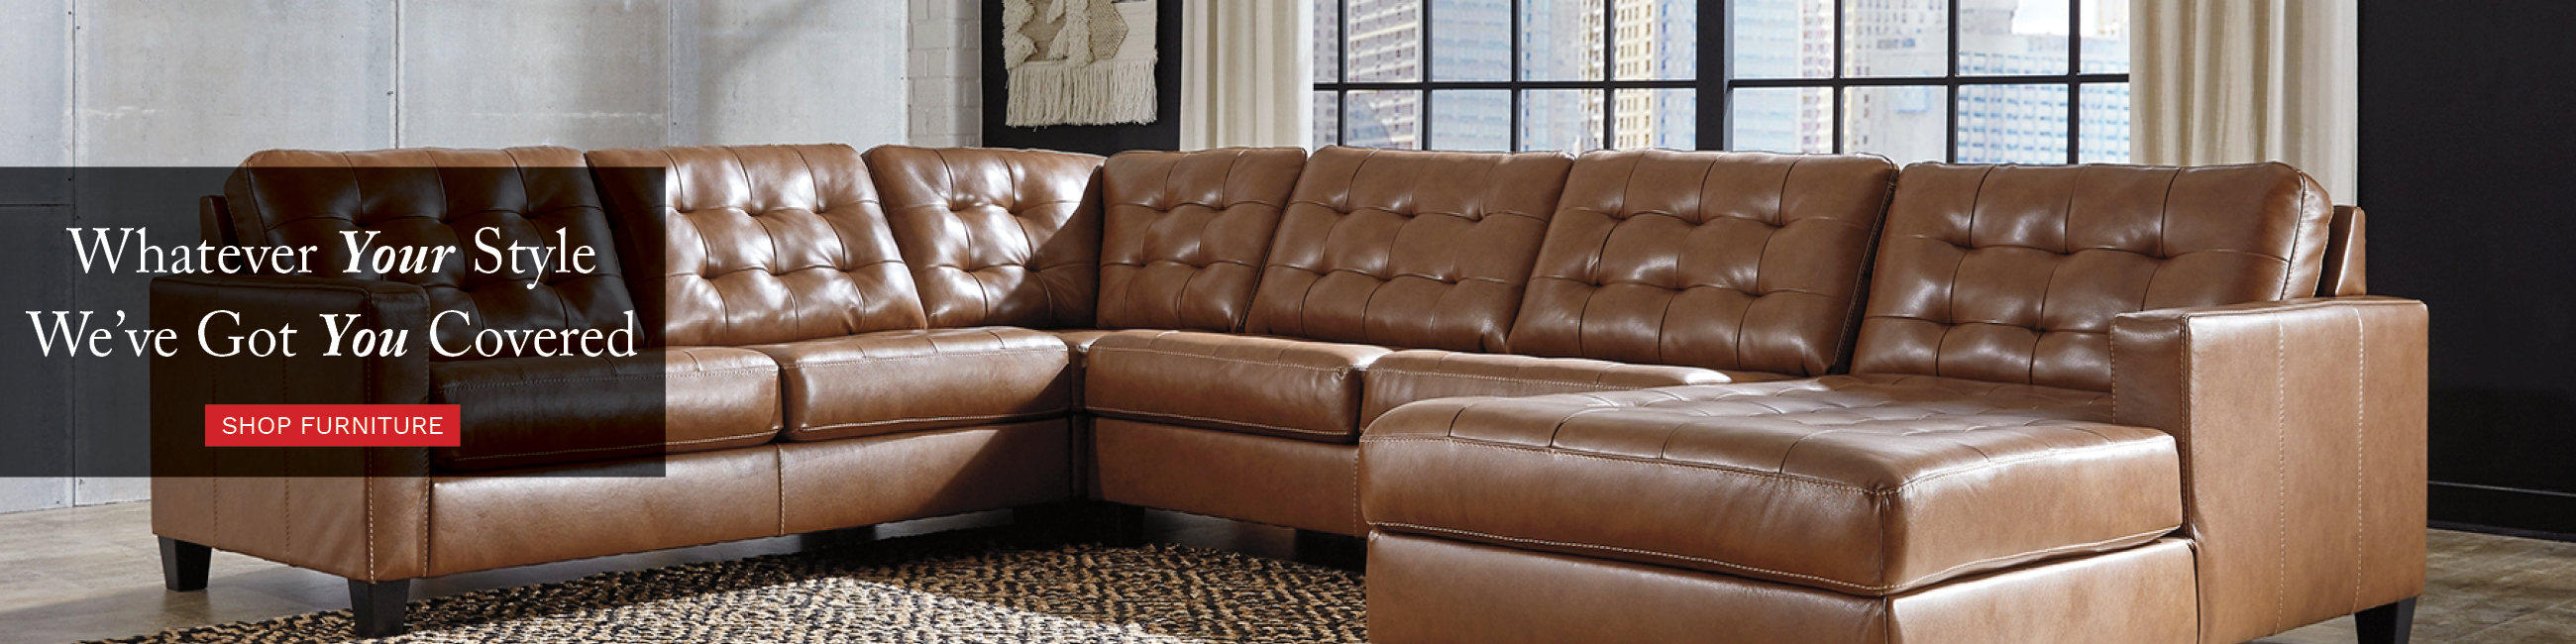 Poirier Furniture - Great Selection of Quality Furniture, Bedding, Appliances, and Electronics